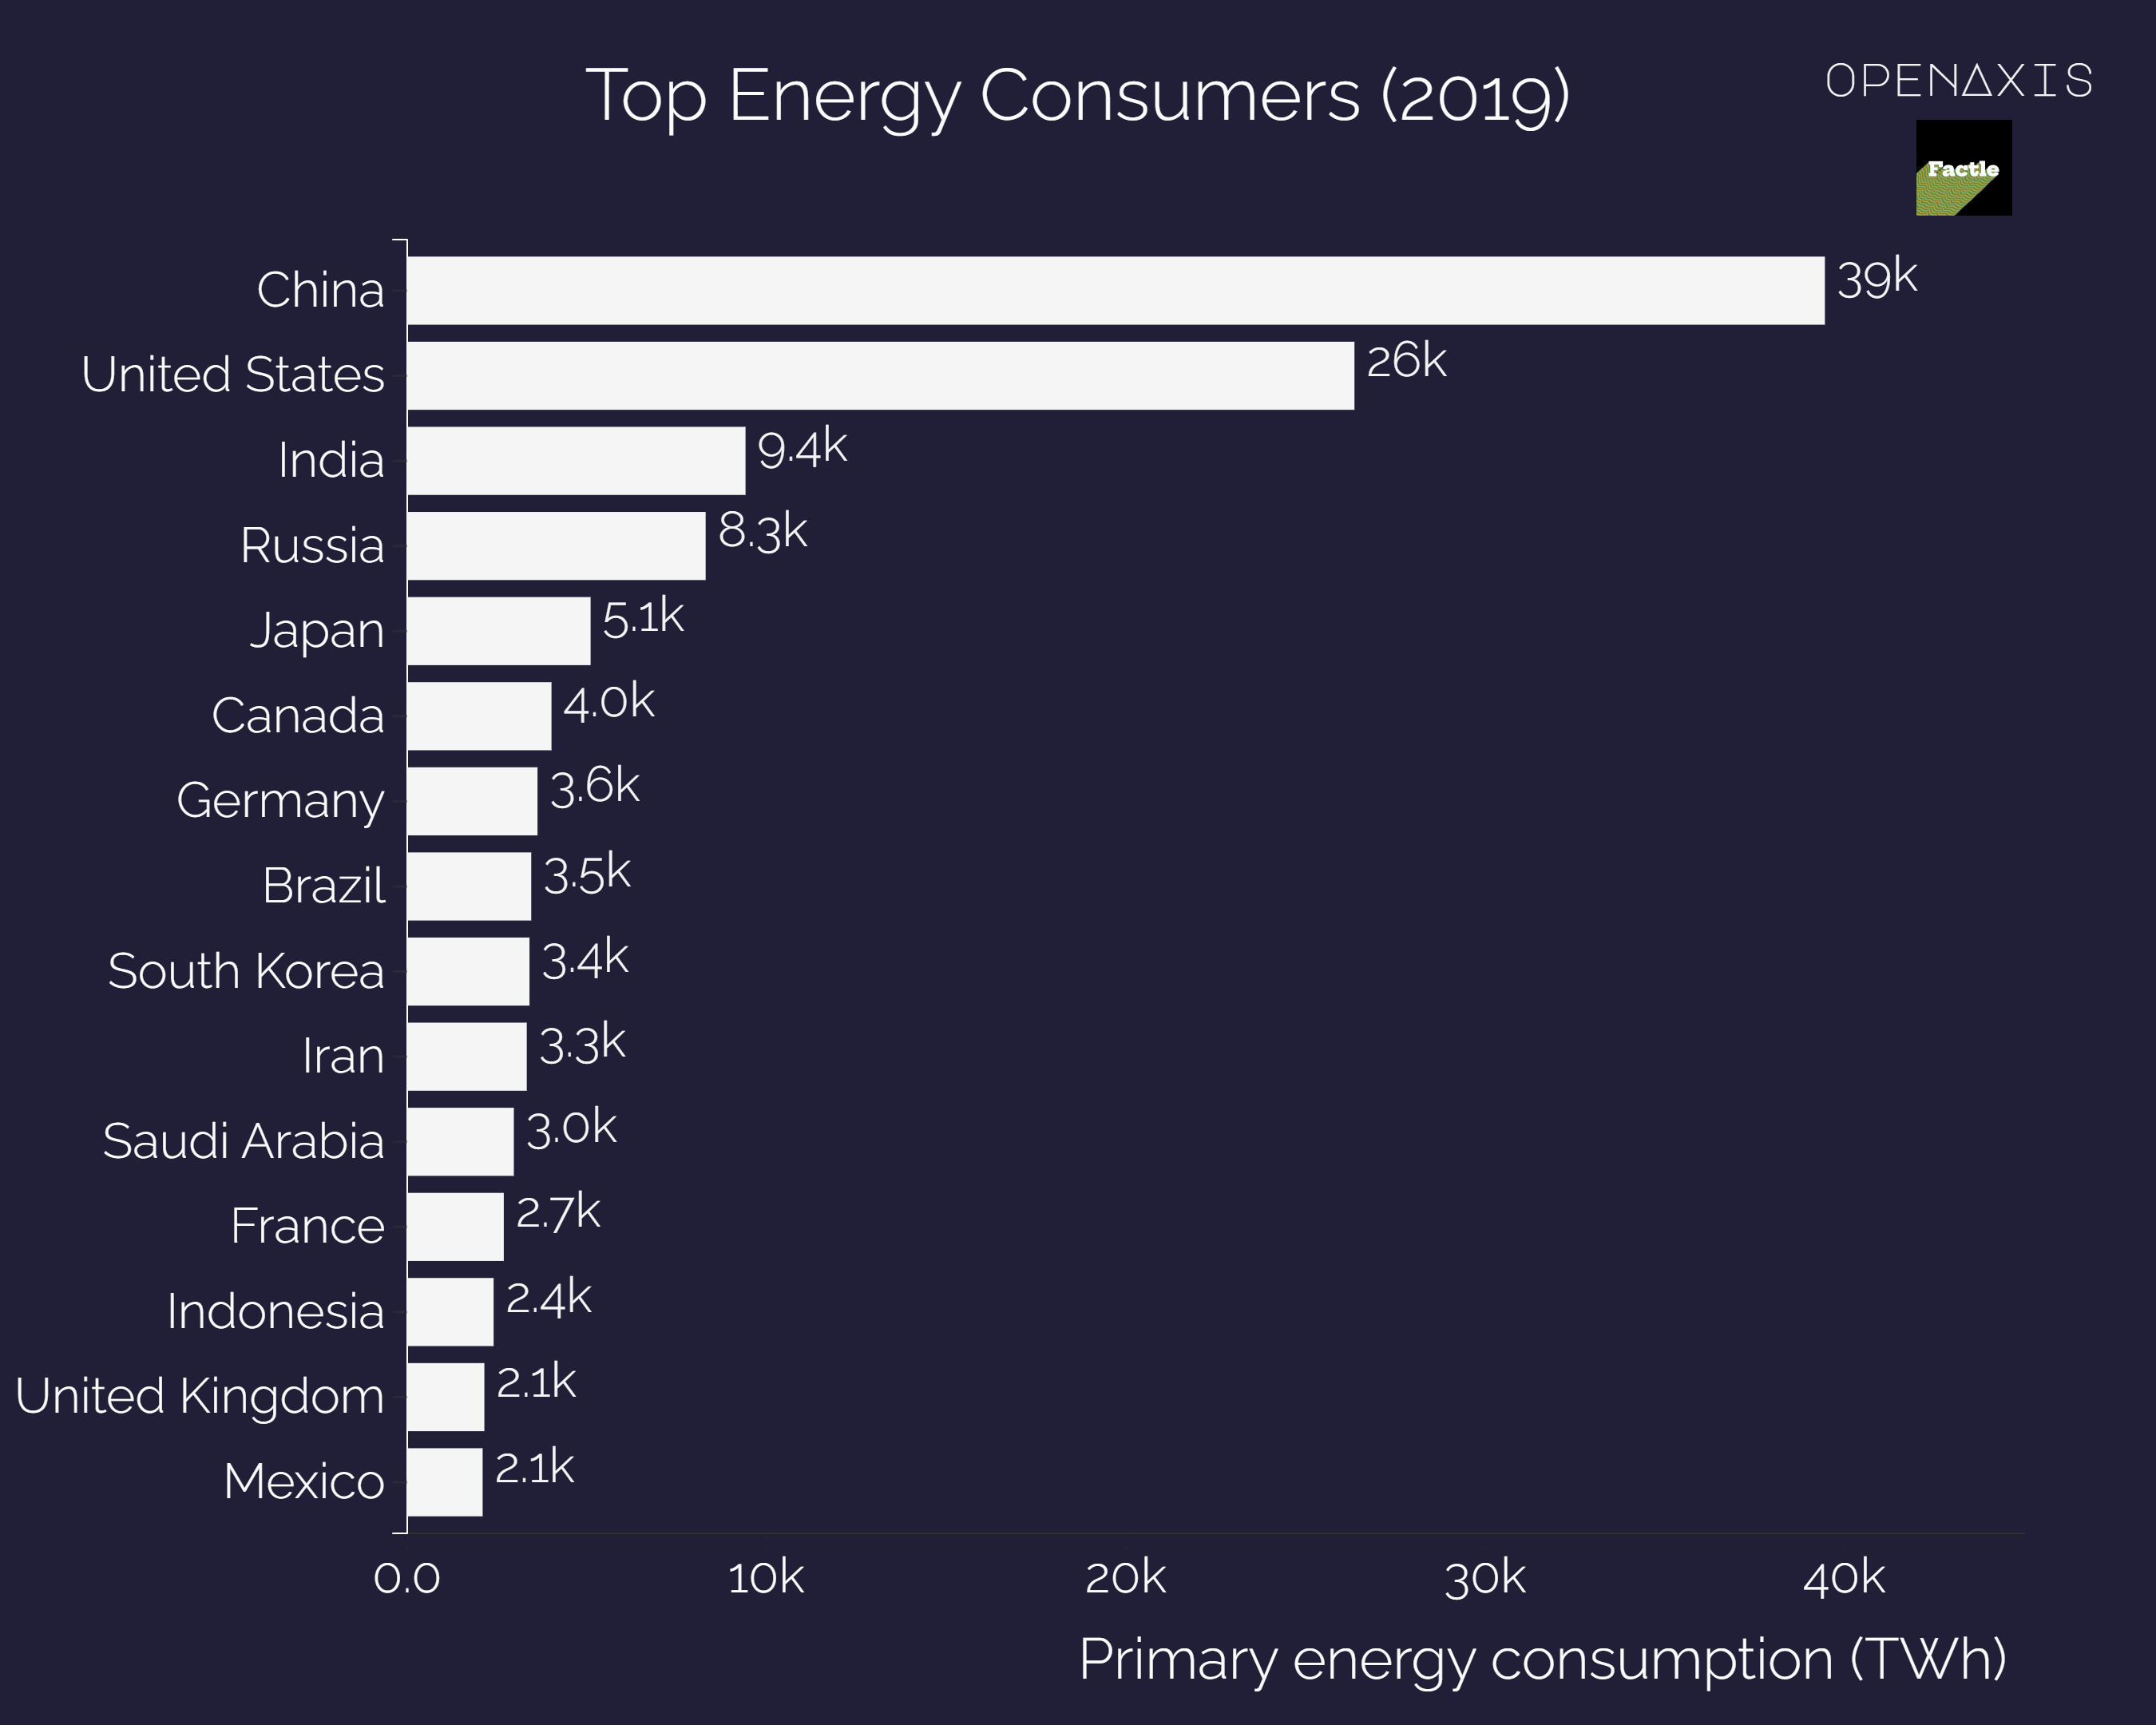 <p>The sum total of energy consumption includes electricity, transport and heating. Primary energy is measured in terawatt-hours (rather than million tonnes of oil equivalents, or alternative energy units).</p><p><span data-index="0" data-denotation-char data-id="0" data-value="&lt;a href=&quot;/search?q=%23energy&quot; target=_self&gt;#energy" data-link="/search?q=%23energy">﻿<span contenteditable="false"><span></span><a href="/search?q=%23energy" target="_self">#energy</a></span>﻿</span> <span data-index="0" data-denotation-char data-id="0" data-value="&lt;a href=&quot;/search?q=%23trivia&quot; target=_self&gt;#trivia" data-link="/search?q=%23trivia">﻿<span contenteditable="false"><span></span><a href="/search?q=%23trivia" target="_self">#trivia</a></span>﻿</span> </p><p>Source: <a href="/data/3642" target="_blank">Our World in Data based on BP; EIA; Gapminder &amp; UNWPP; Bolt, Jutta and Jan Luiten van Zanden (2020)</a></p>